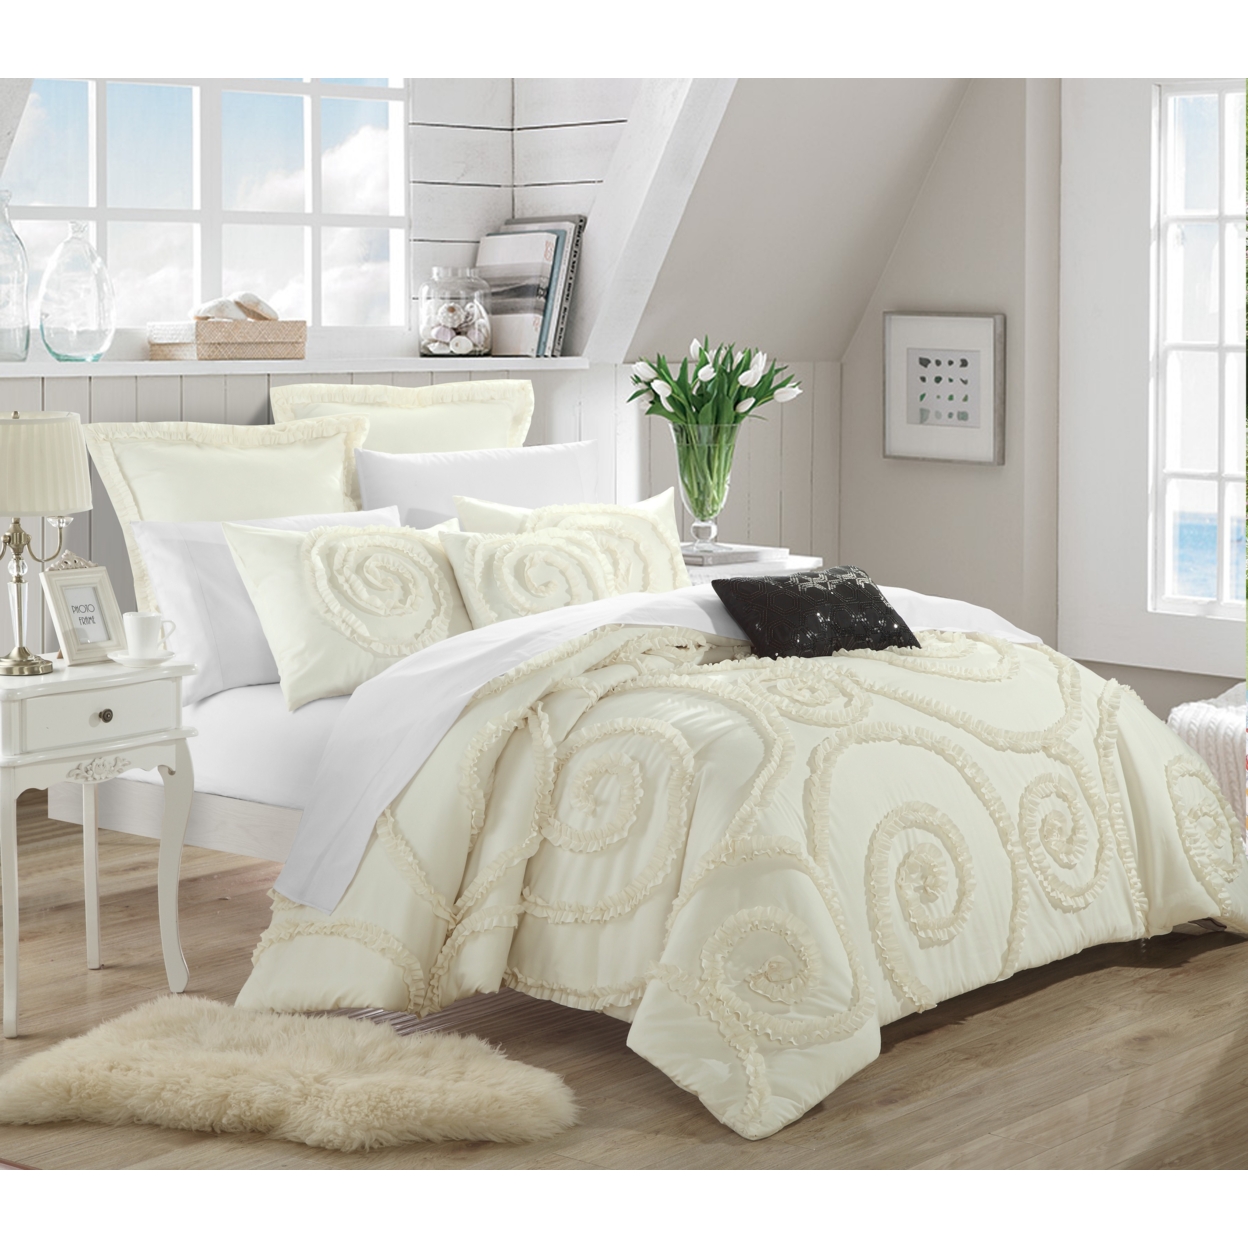 Chic Home Rosalinda 11-Piece Ruffled Etched Embroidery Comforter Set, Bed In A Bag, Sheet Set, 4 Shams And 2 Throw Pillows Included - Beige,